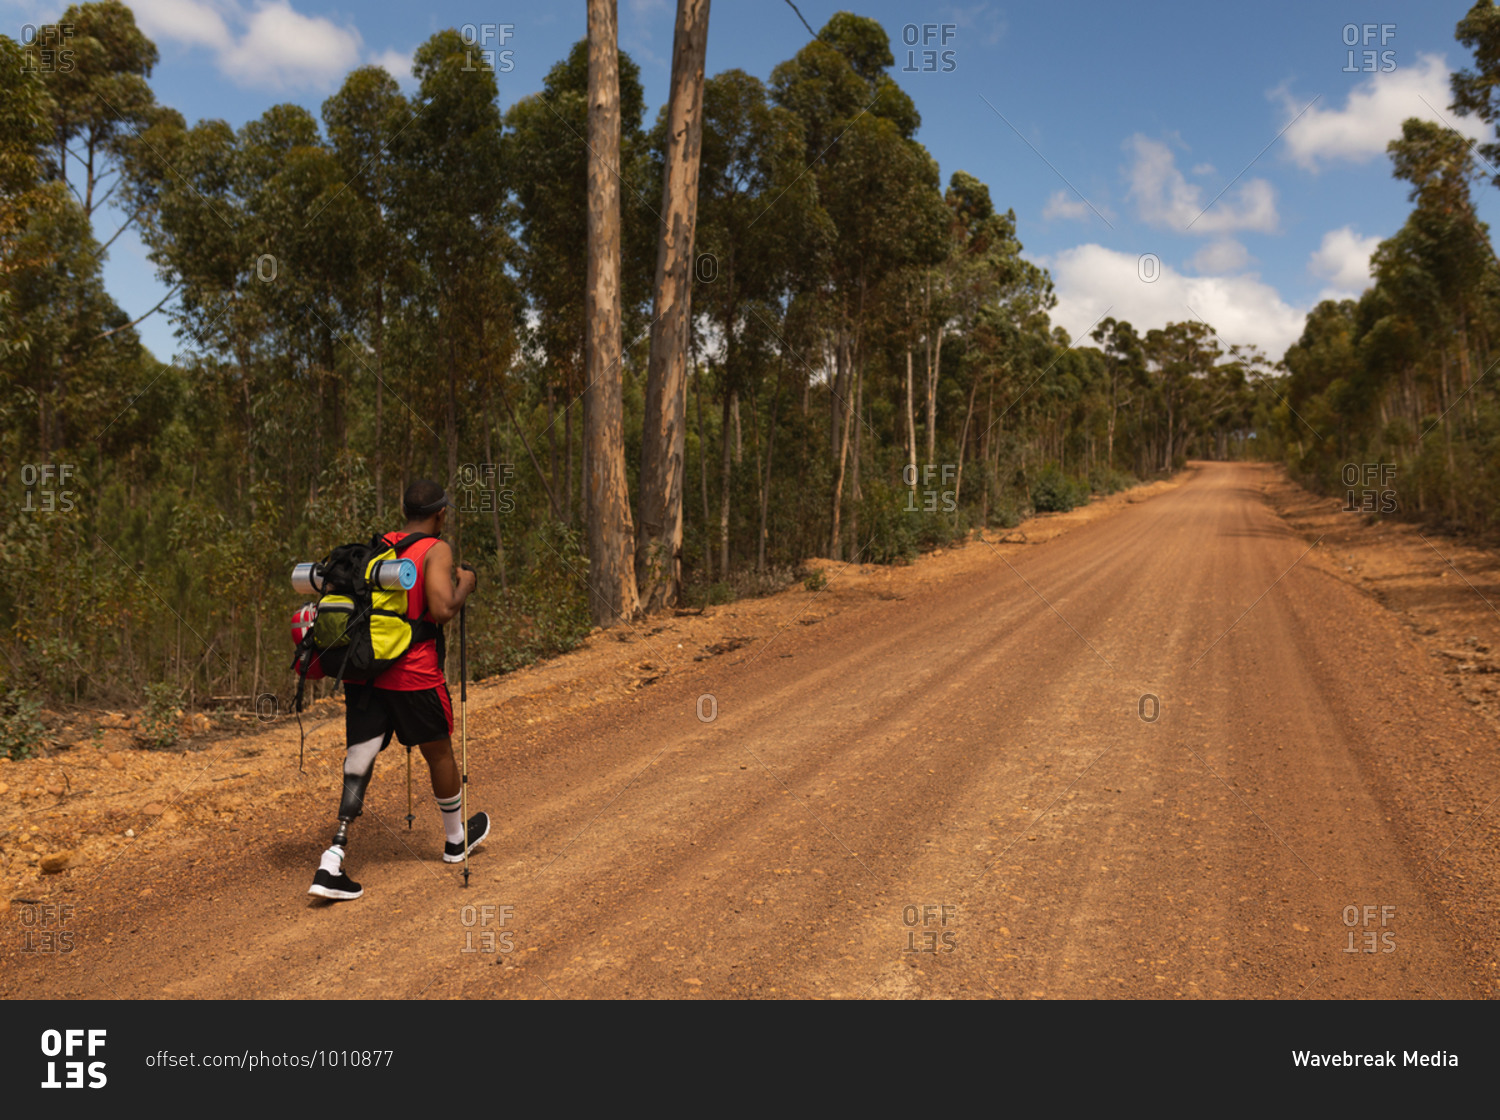 A fit, disabled mixed race male athlete with prosthetic leg, enjoying his time on a trip, hiking, walking with sticks on dirt road in a forest. Active lifestyle with disability.